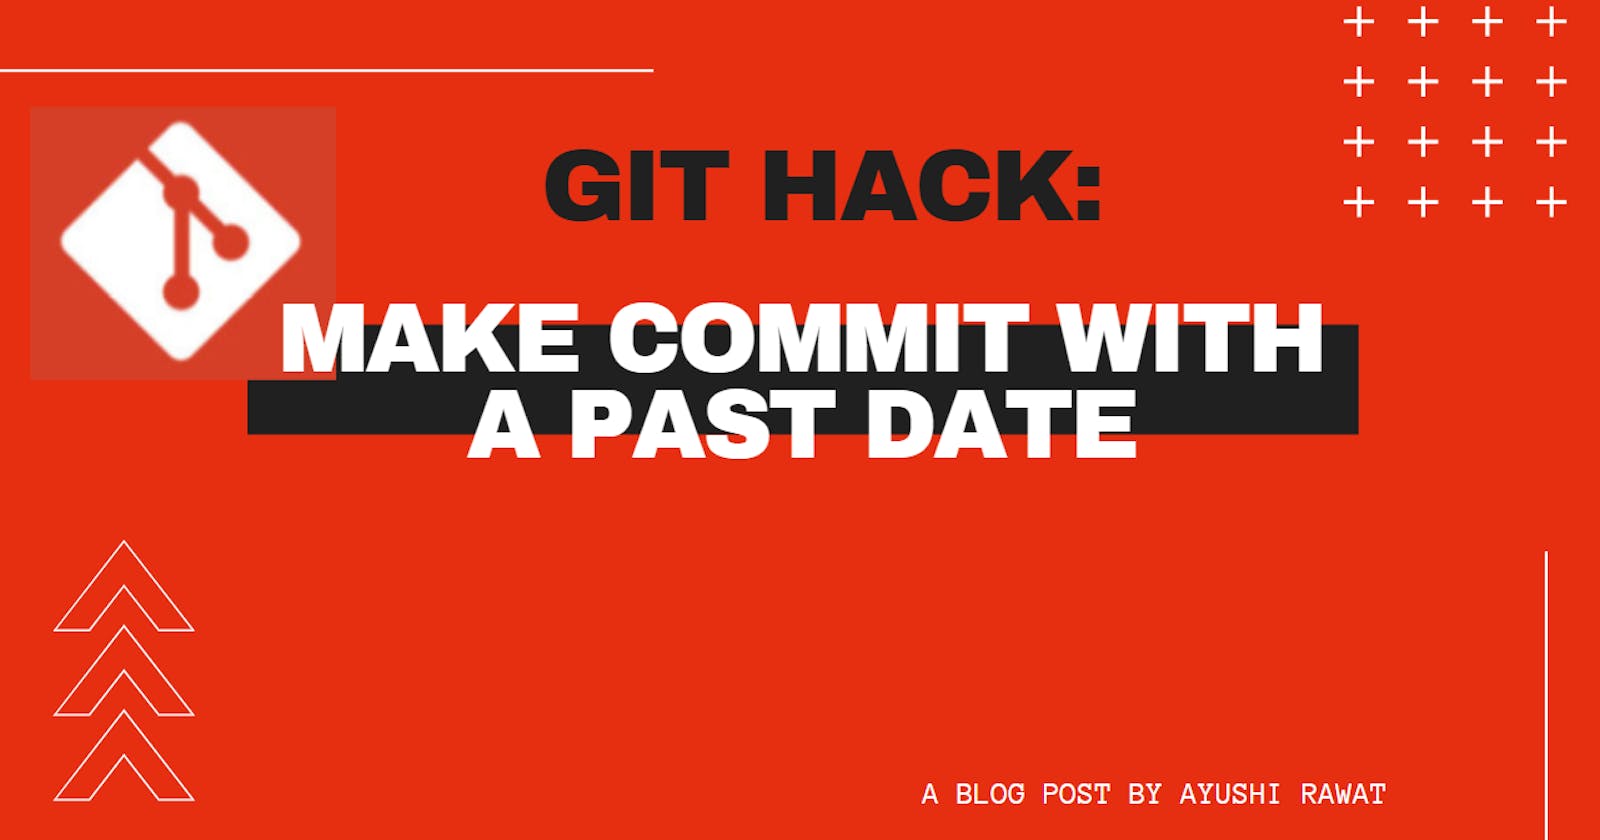 Git Hack: Make commit with a past date